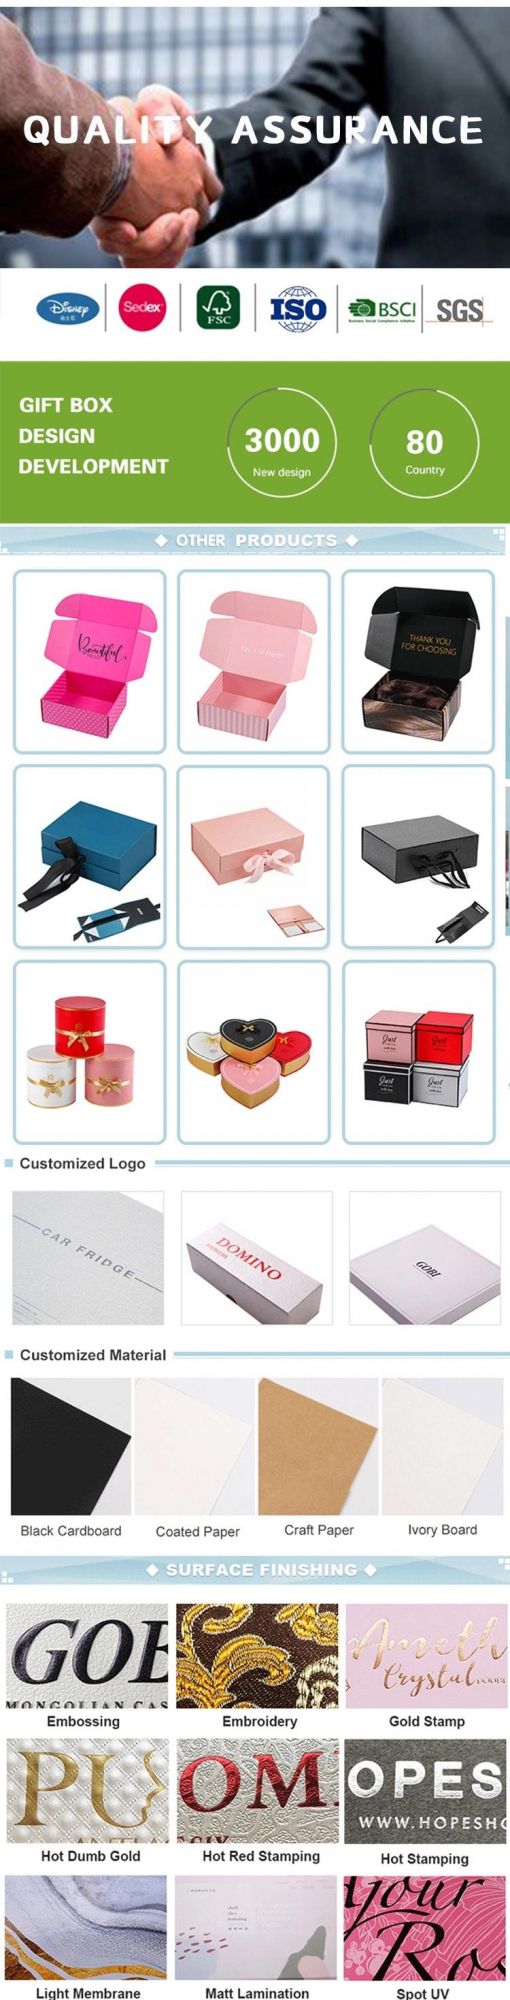 China Wholesale Eco-Friendly Apparel/ Clothing/Shoe/Garment Packaging Foldable Shipping/Mailer Paper Packing Boxes